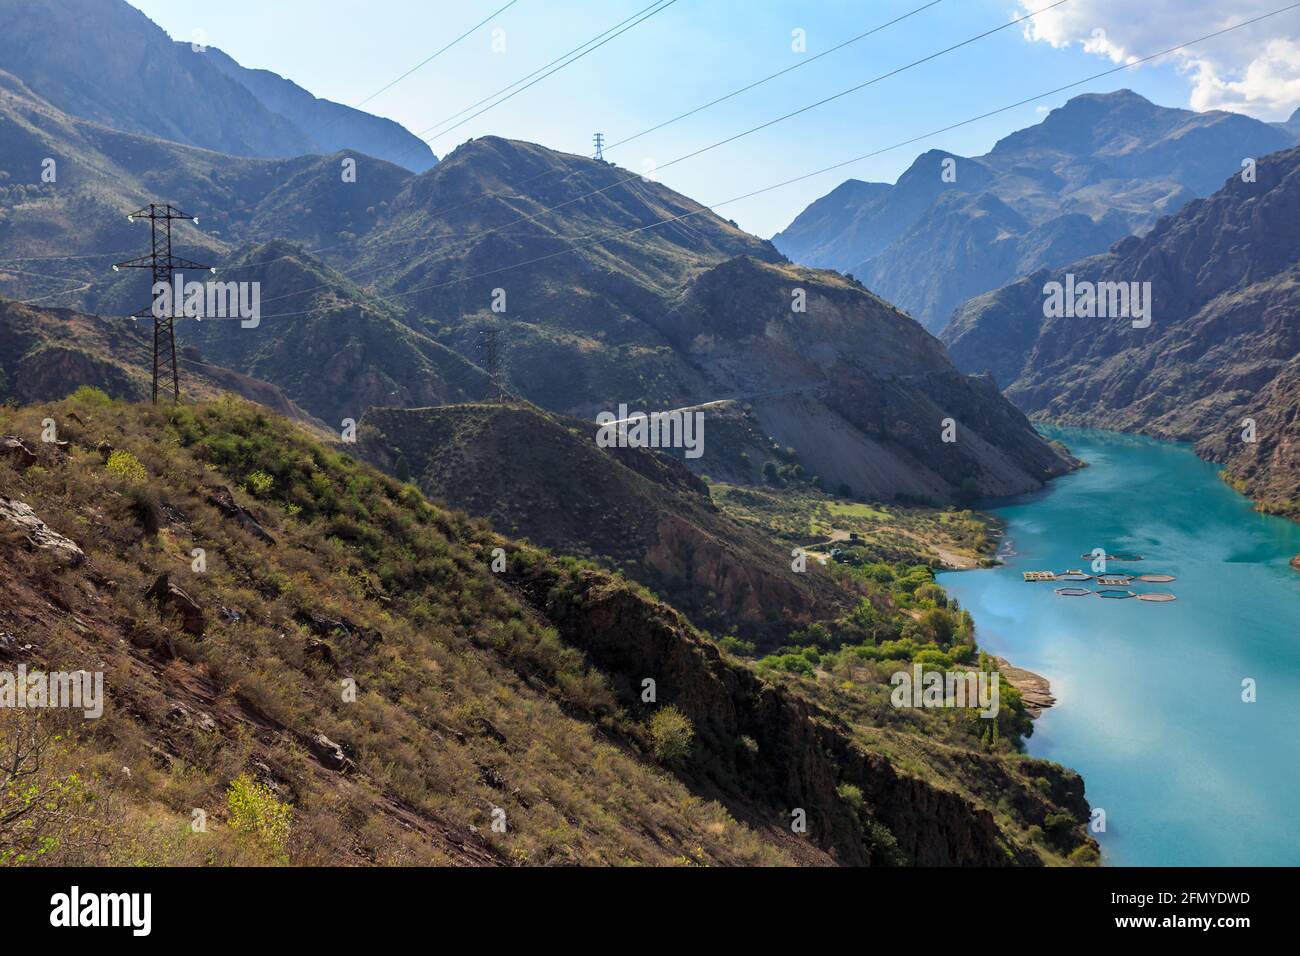 The Naryn River in the Tien Shan mountains in Kyrgyzstan. Stock Photo